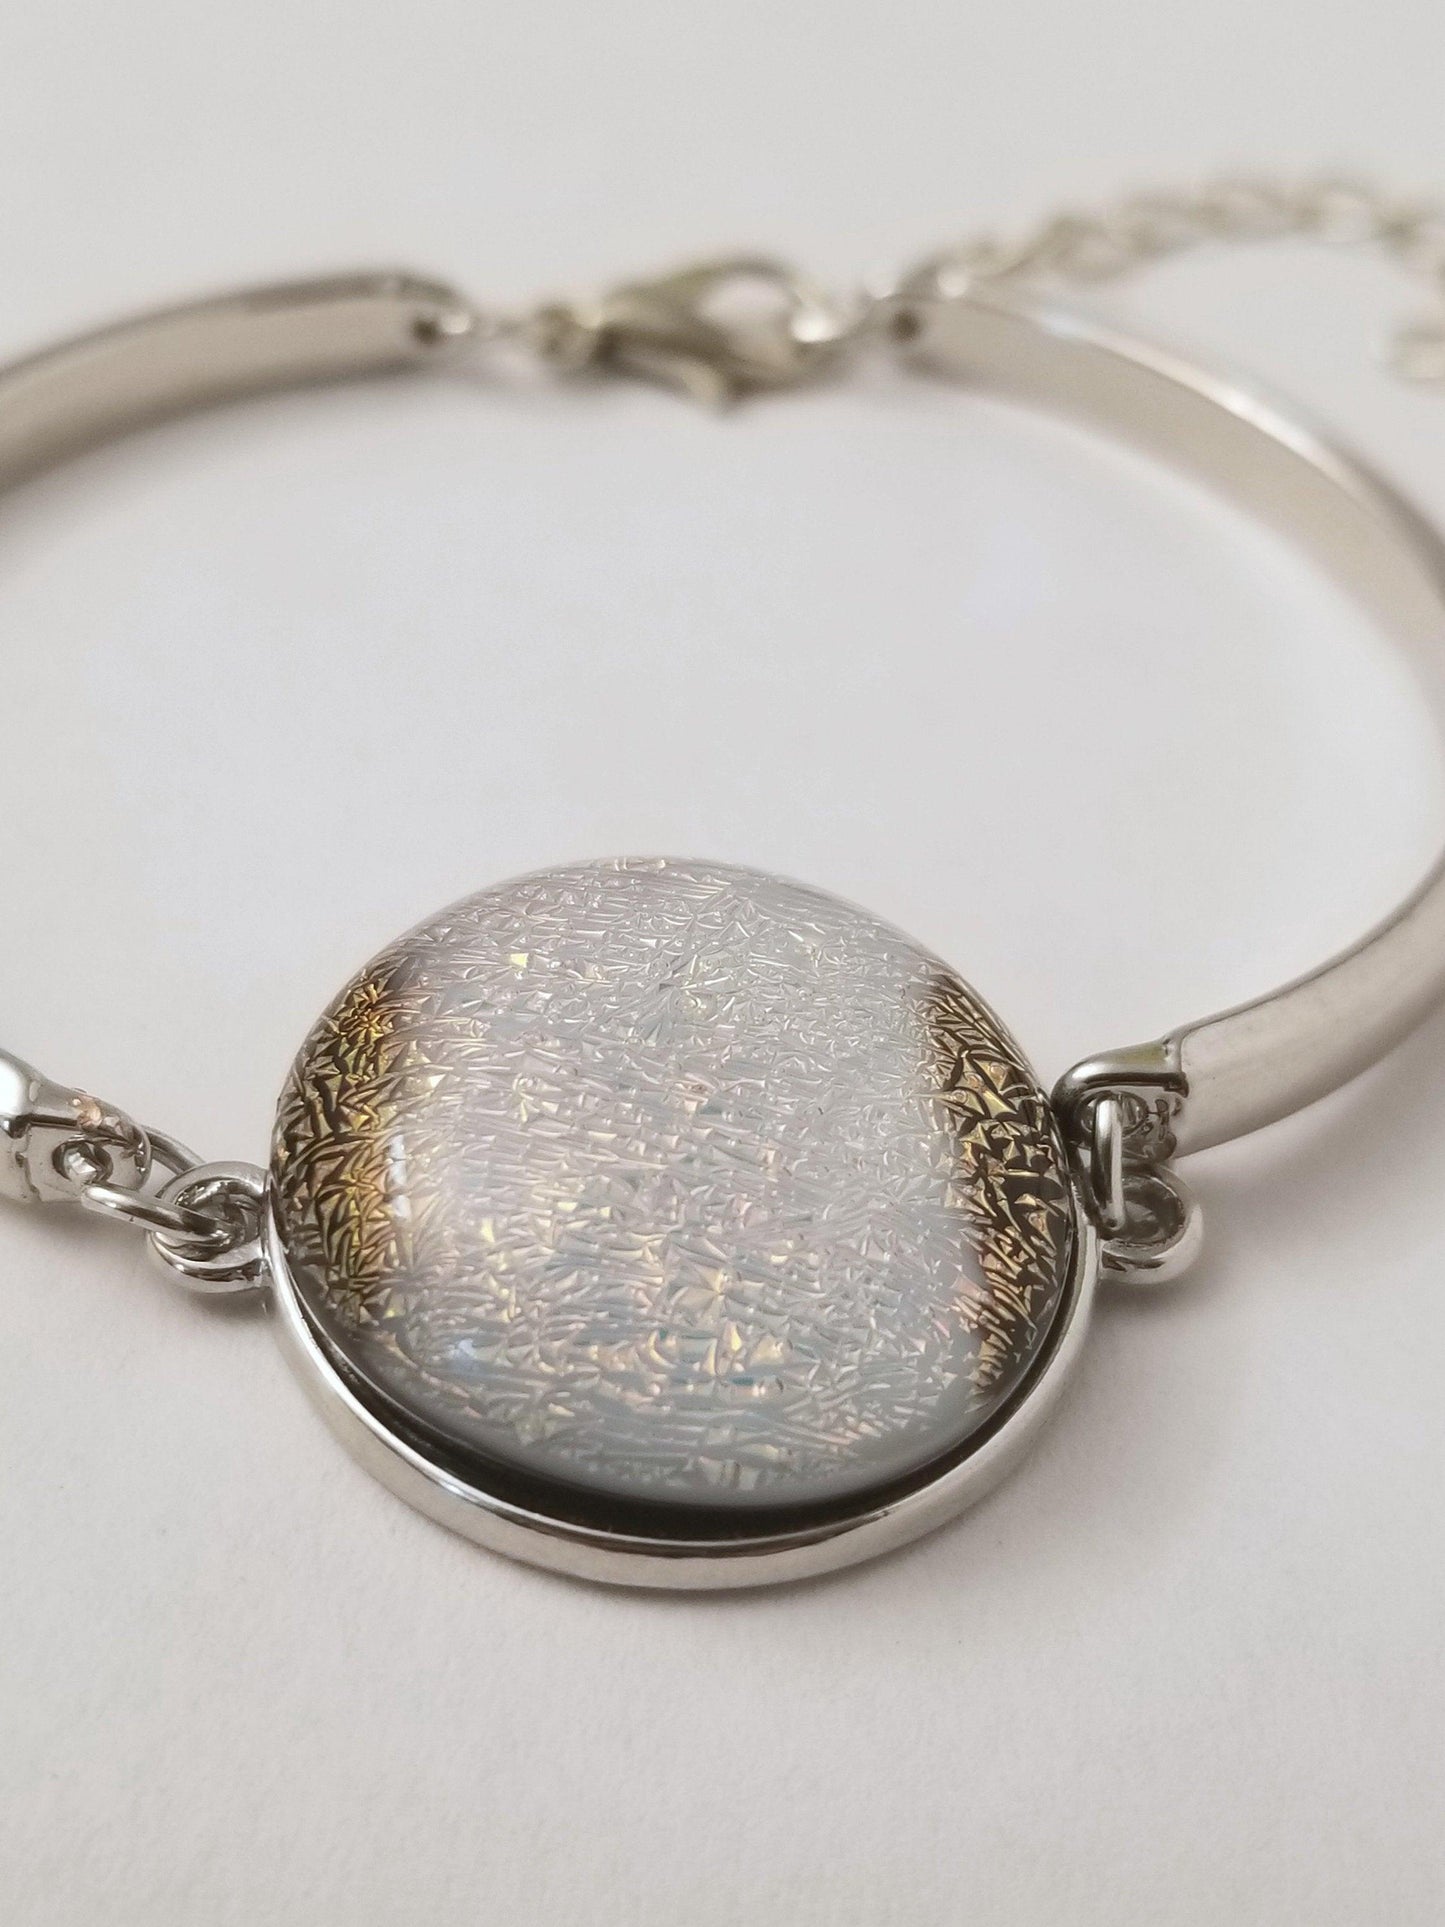 Delicate Adjustable Bracelet, silver tone with Orange and White  Dichroic fused glass cabochon